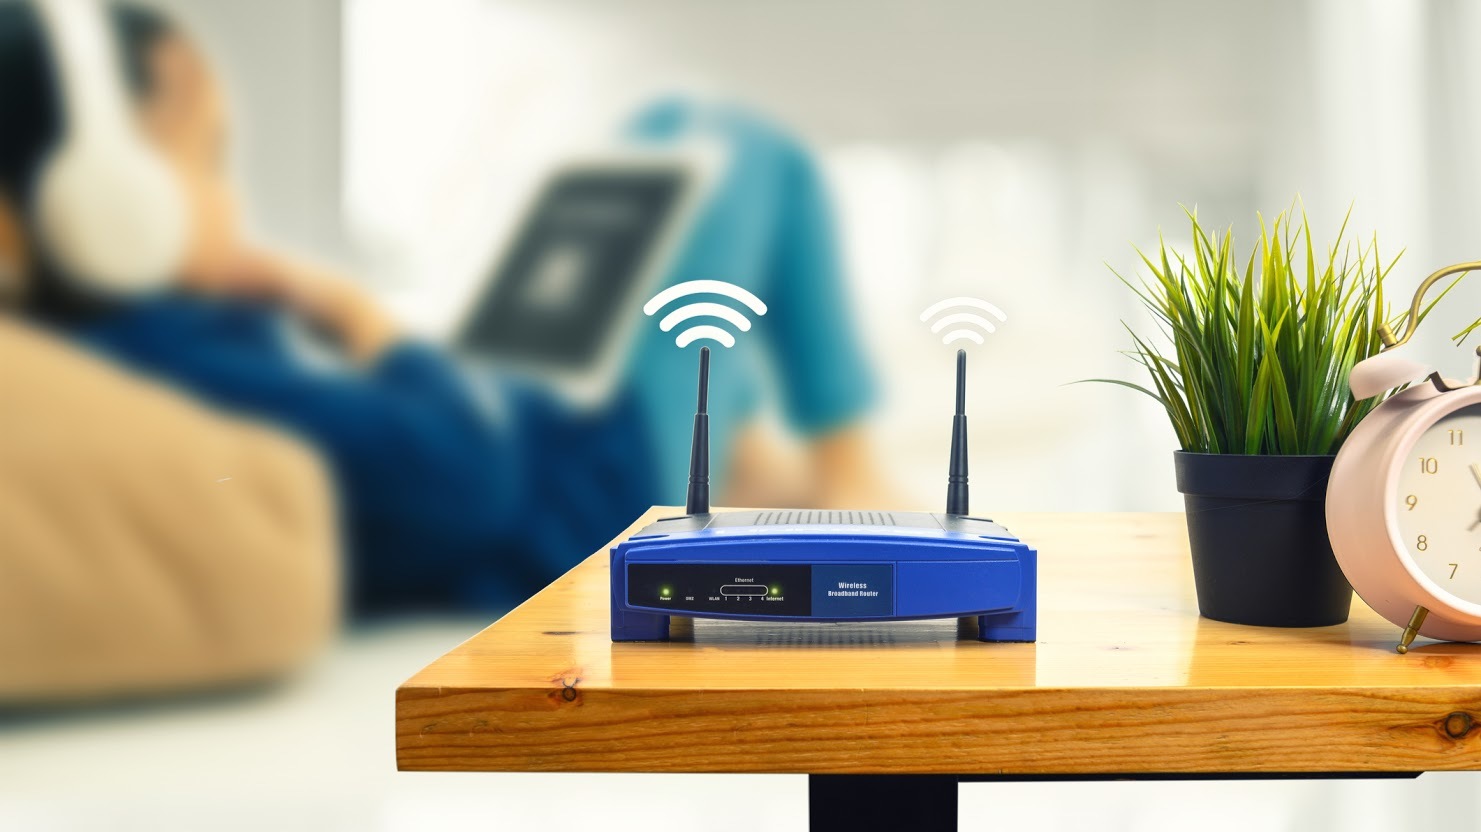 Take Care of Your Wi-Fi Network